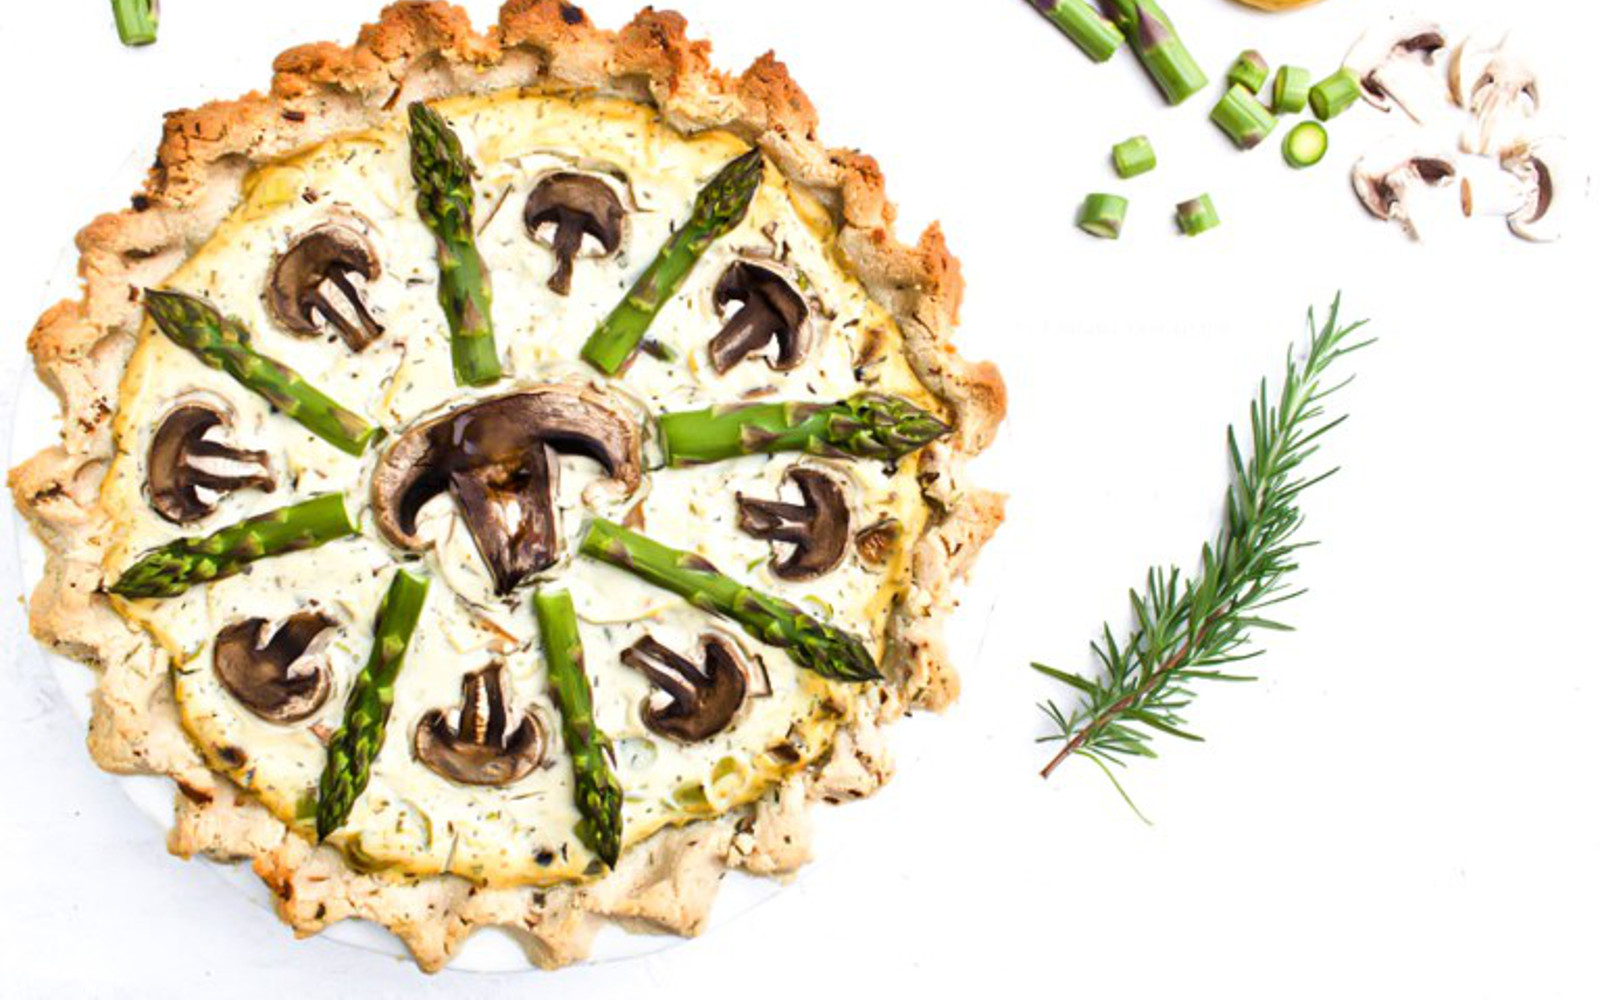 Vegan Gluten-Free Asparagus and Mushroom Tofu and Quiche with Rosemary Almond Flour Crust